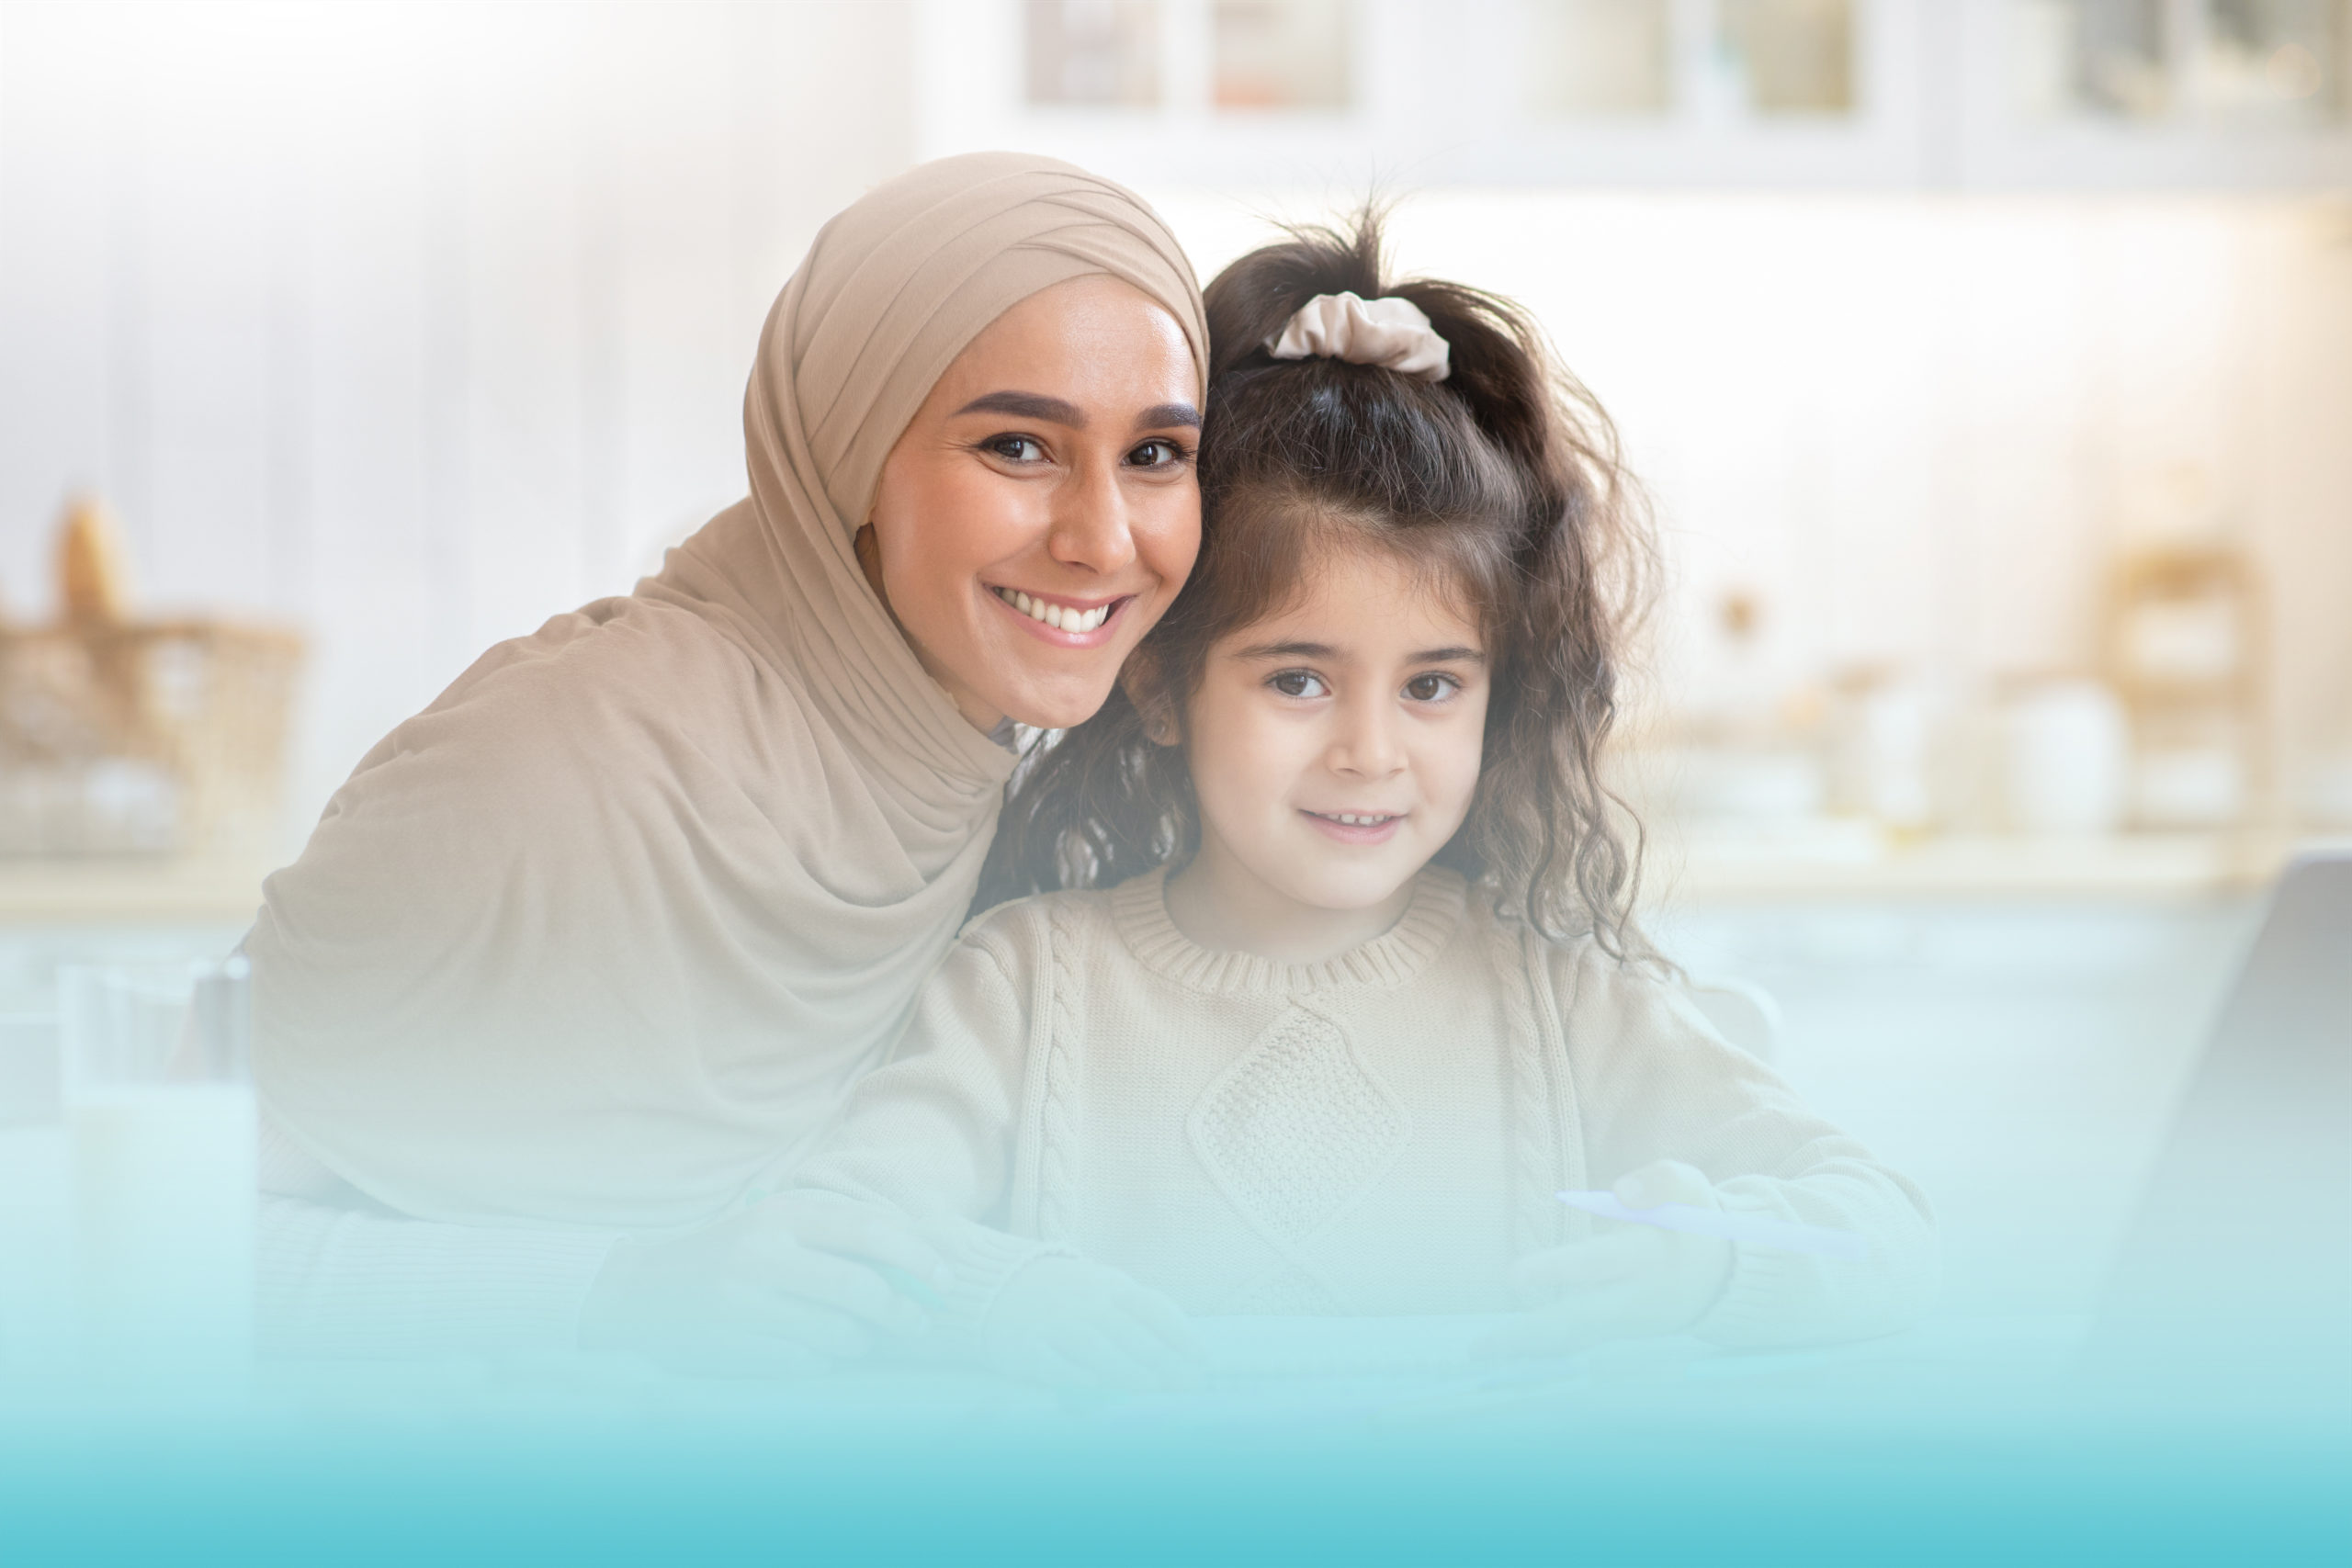 Portrait Of Happy Muslim Mom And Little Daughter Posing In Kitchen Interior While Having Fun Together At Home, Cheerful Family Sitting At Table And Drawing With Colorful Pencils, Smiling At Camera